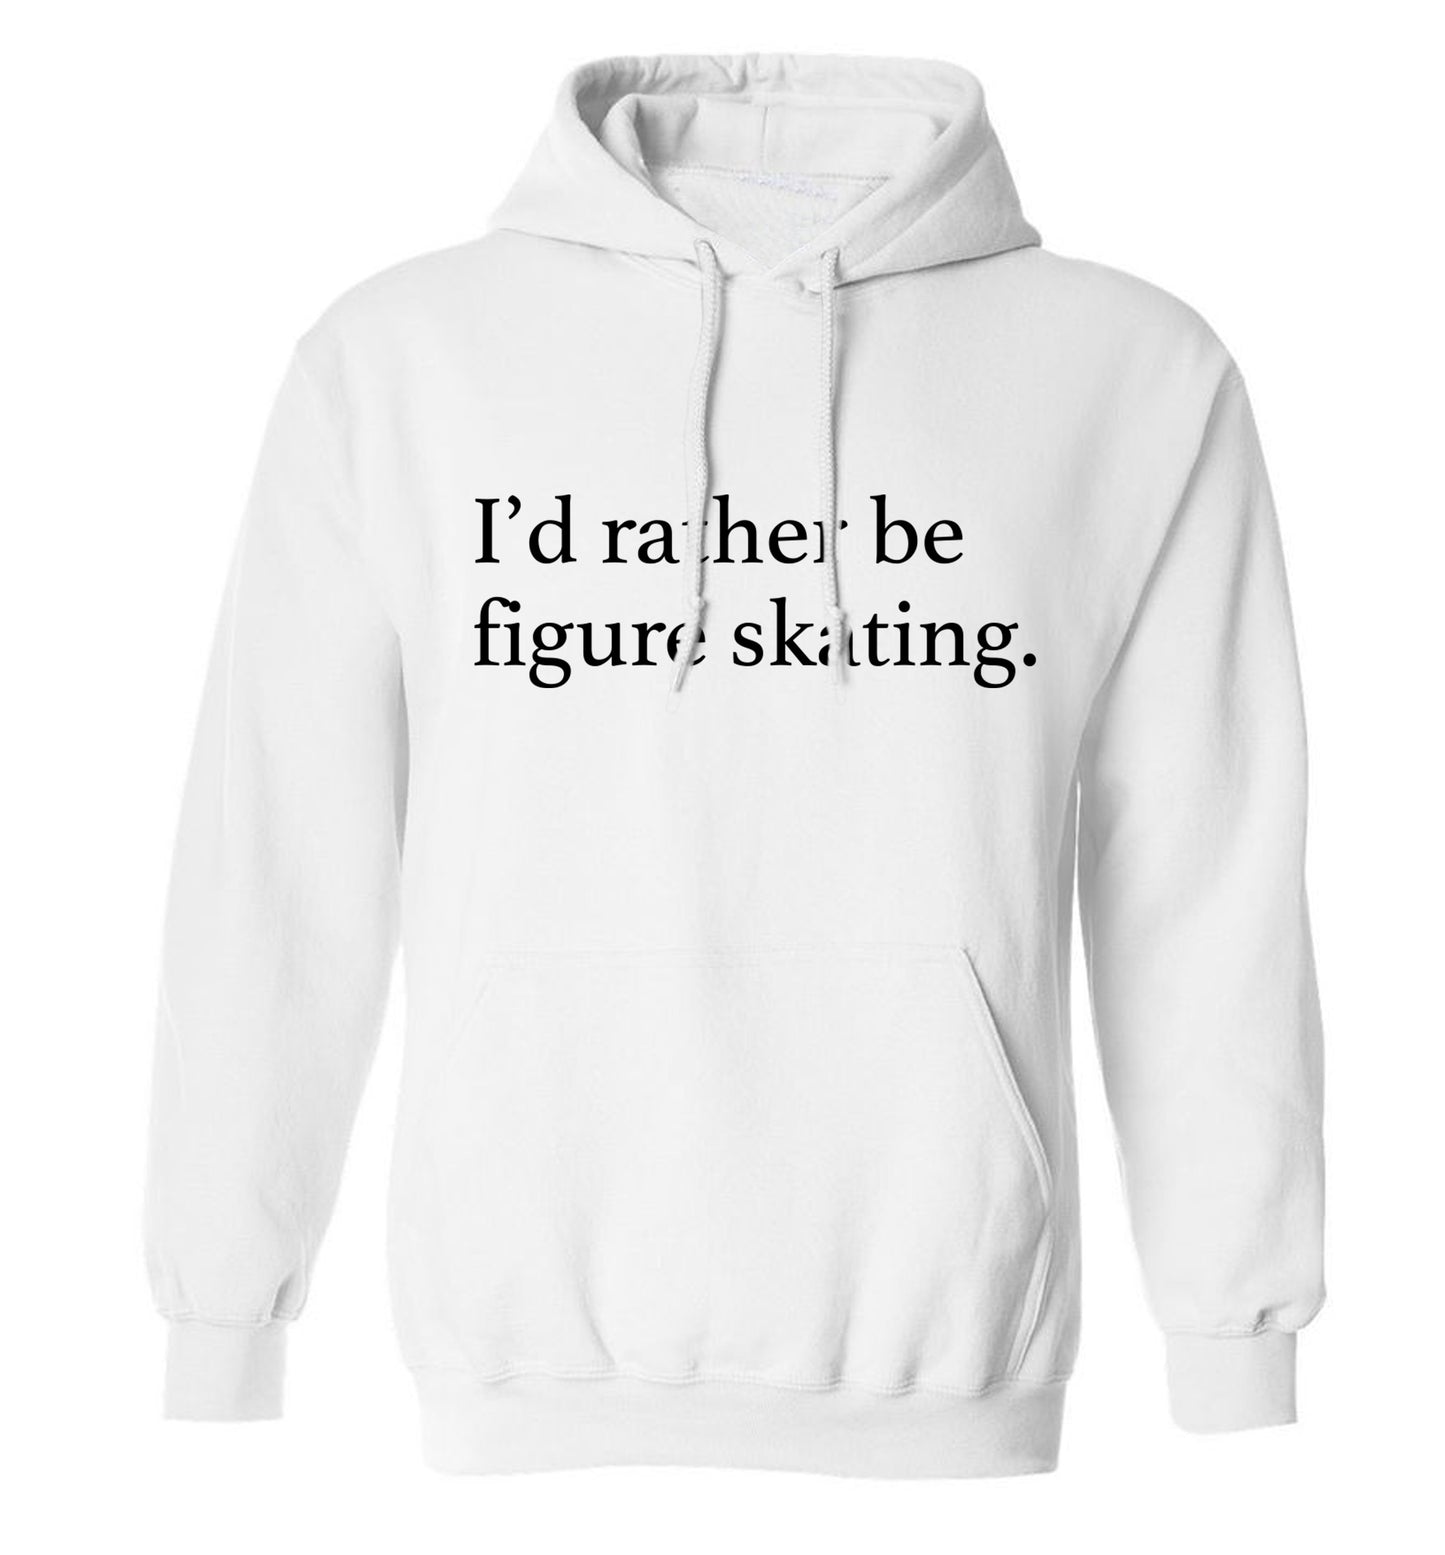 I'd rather be figure skating adults unisexwhite hoodie 2XL